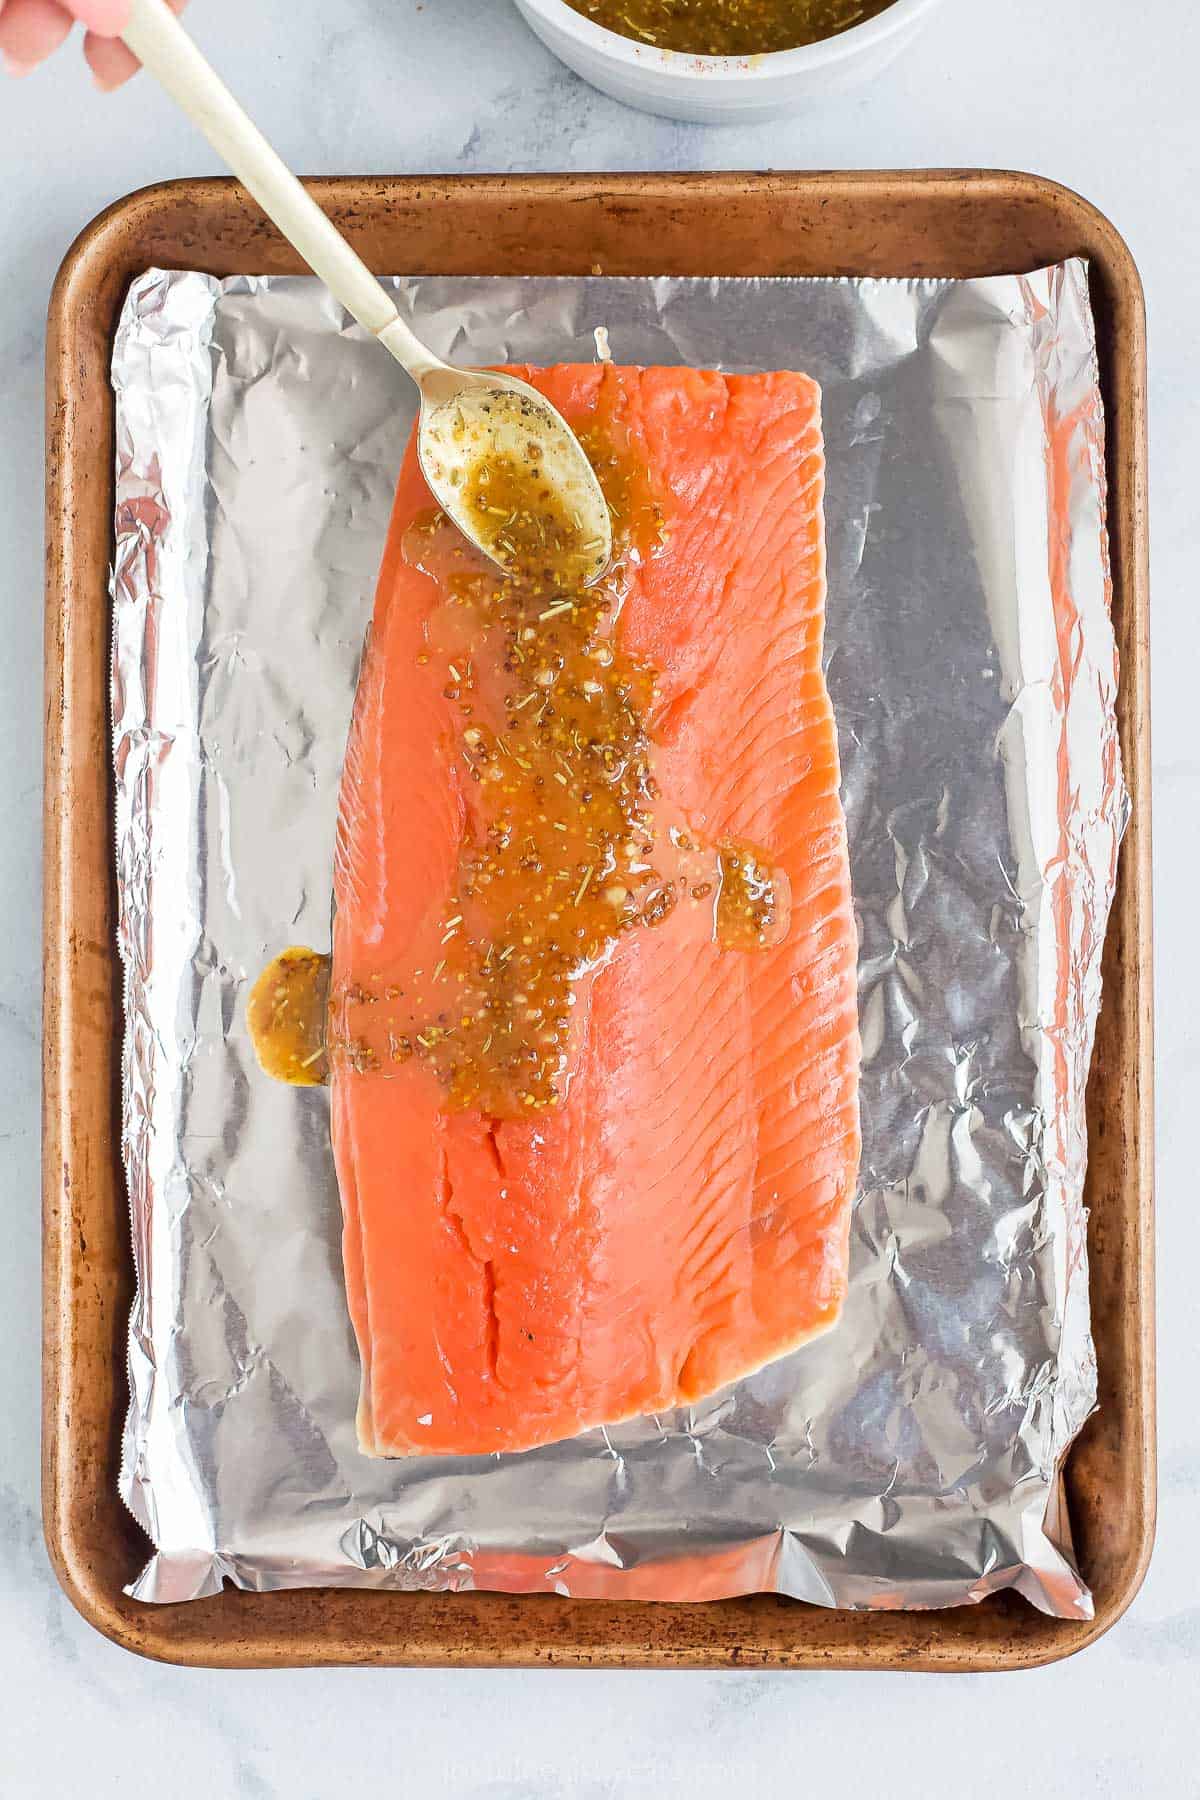 A raw fish fillet on a lined baking sheet with homemade glaze being spooned over it